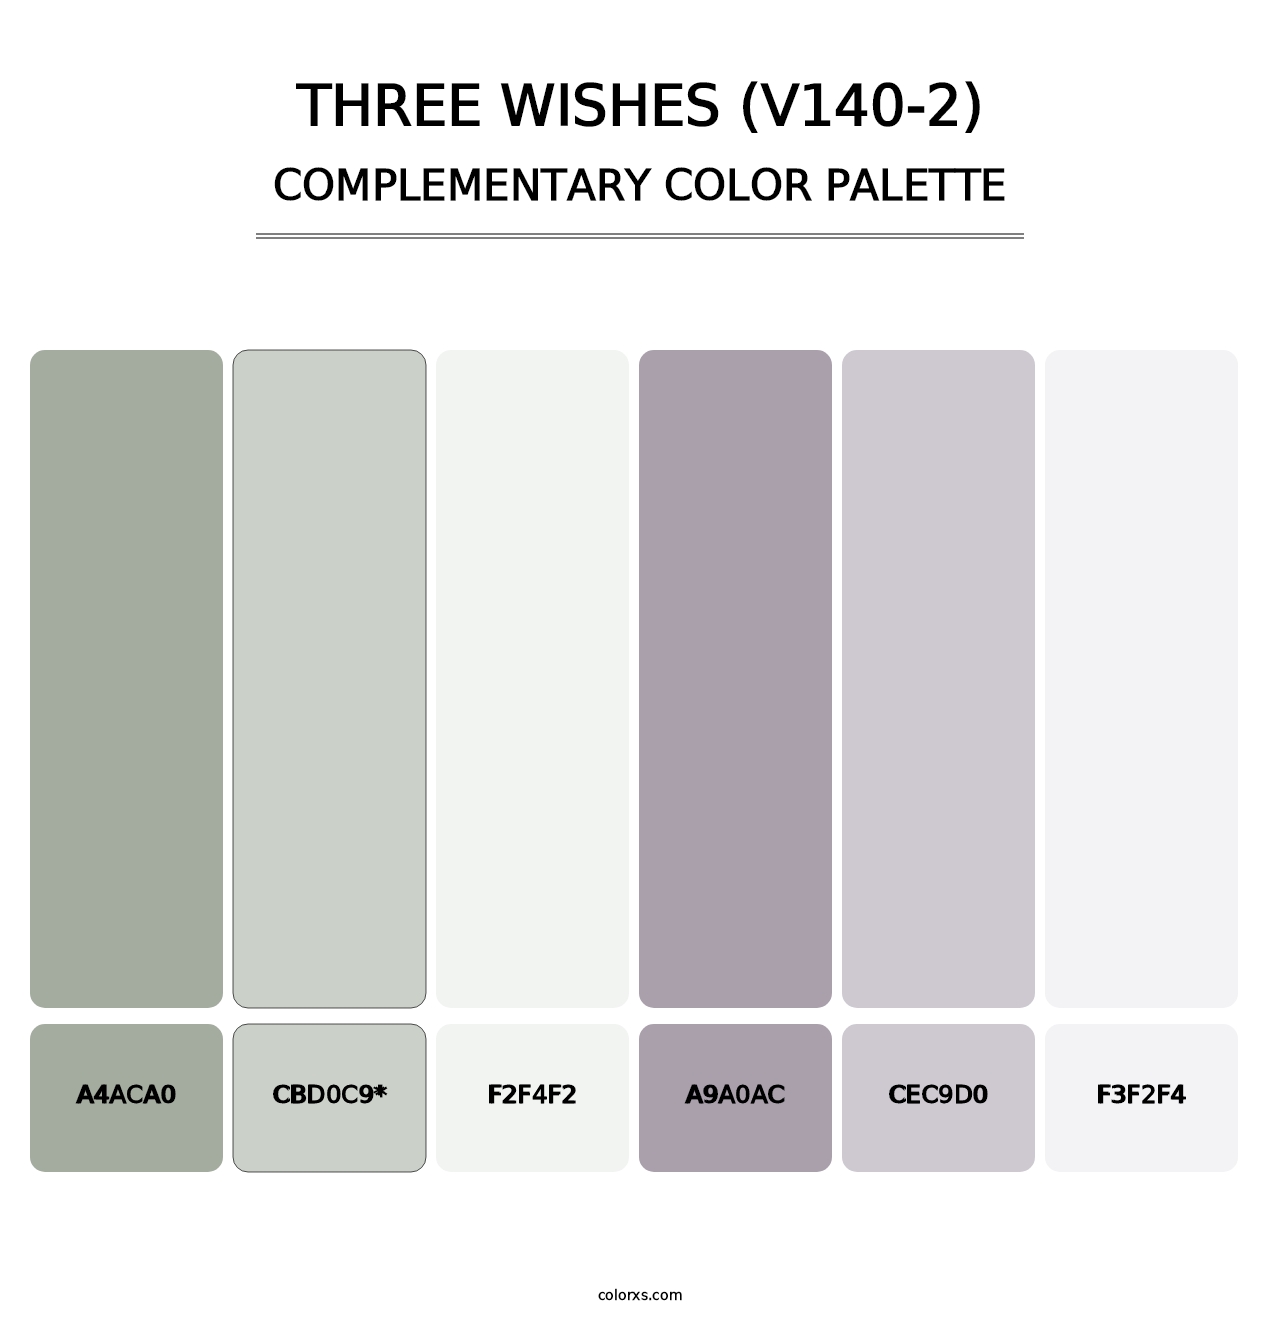 Three Wishes (V140-2) - Complementary Color Palette